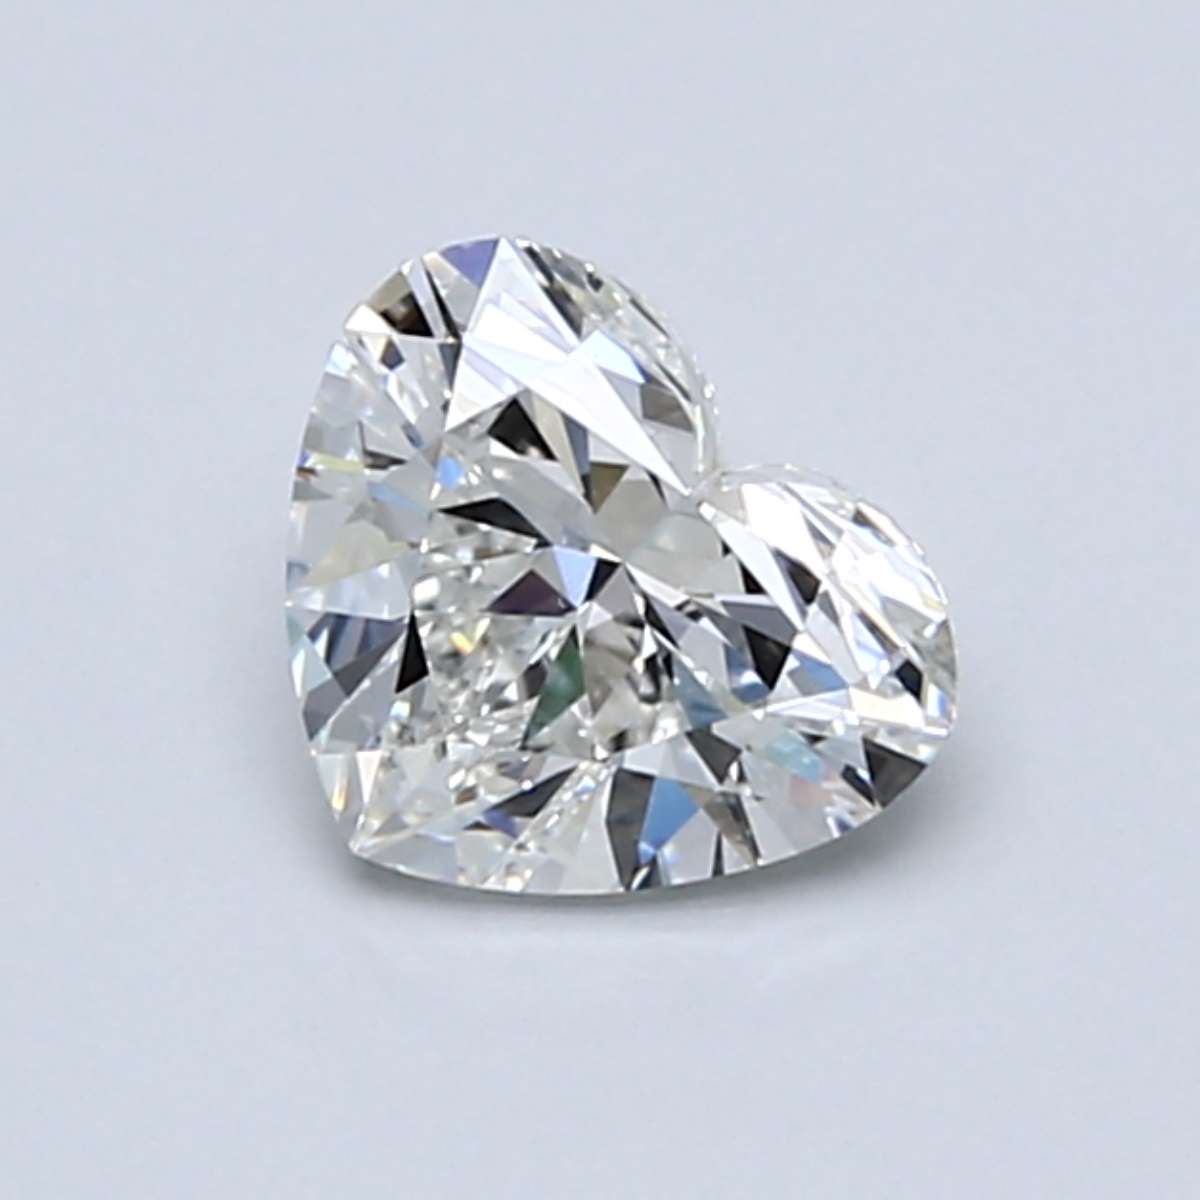 Heart 0.98 Carat G Color VS2 Clarity For Sale